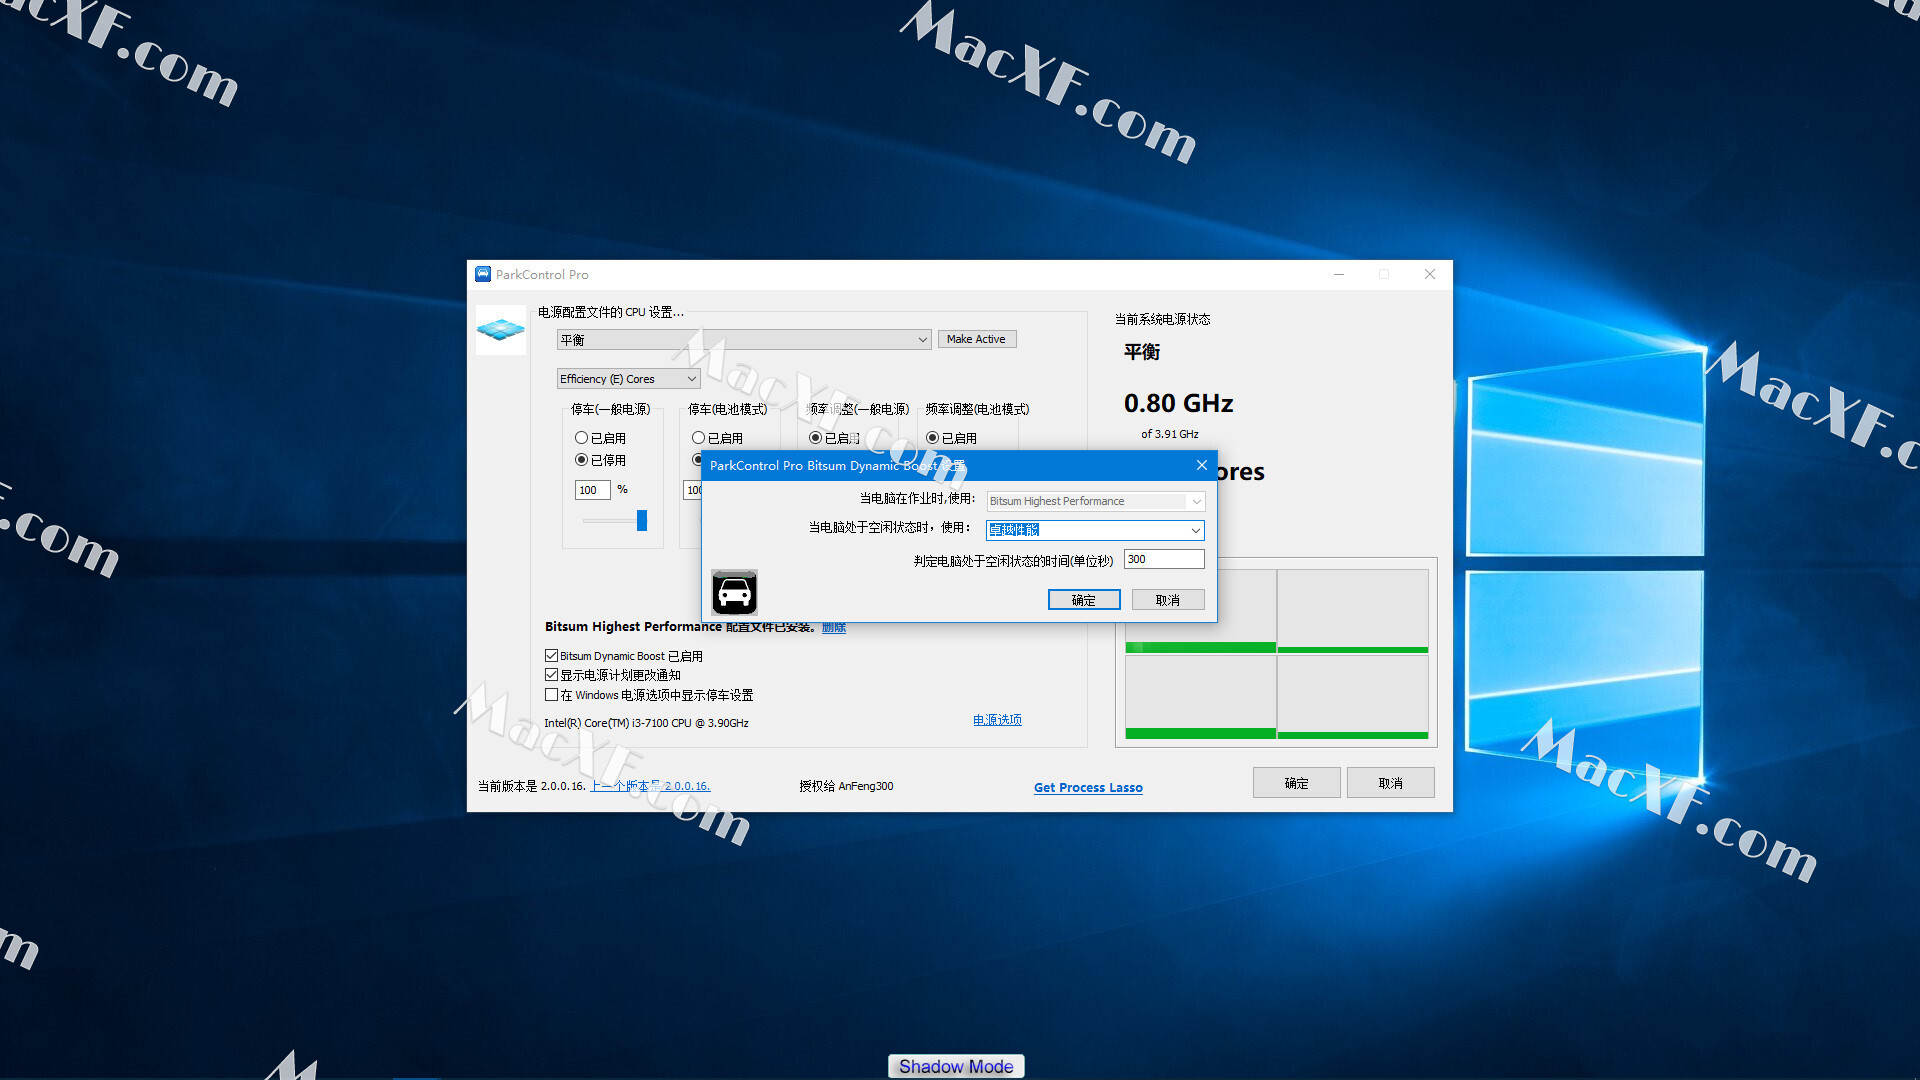 Bitsum ParkControl Pro 4.2.1.10 download the new version for iphone